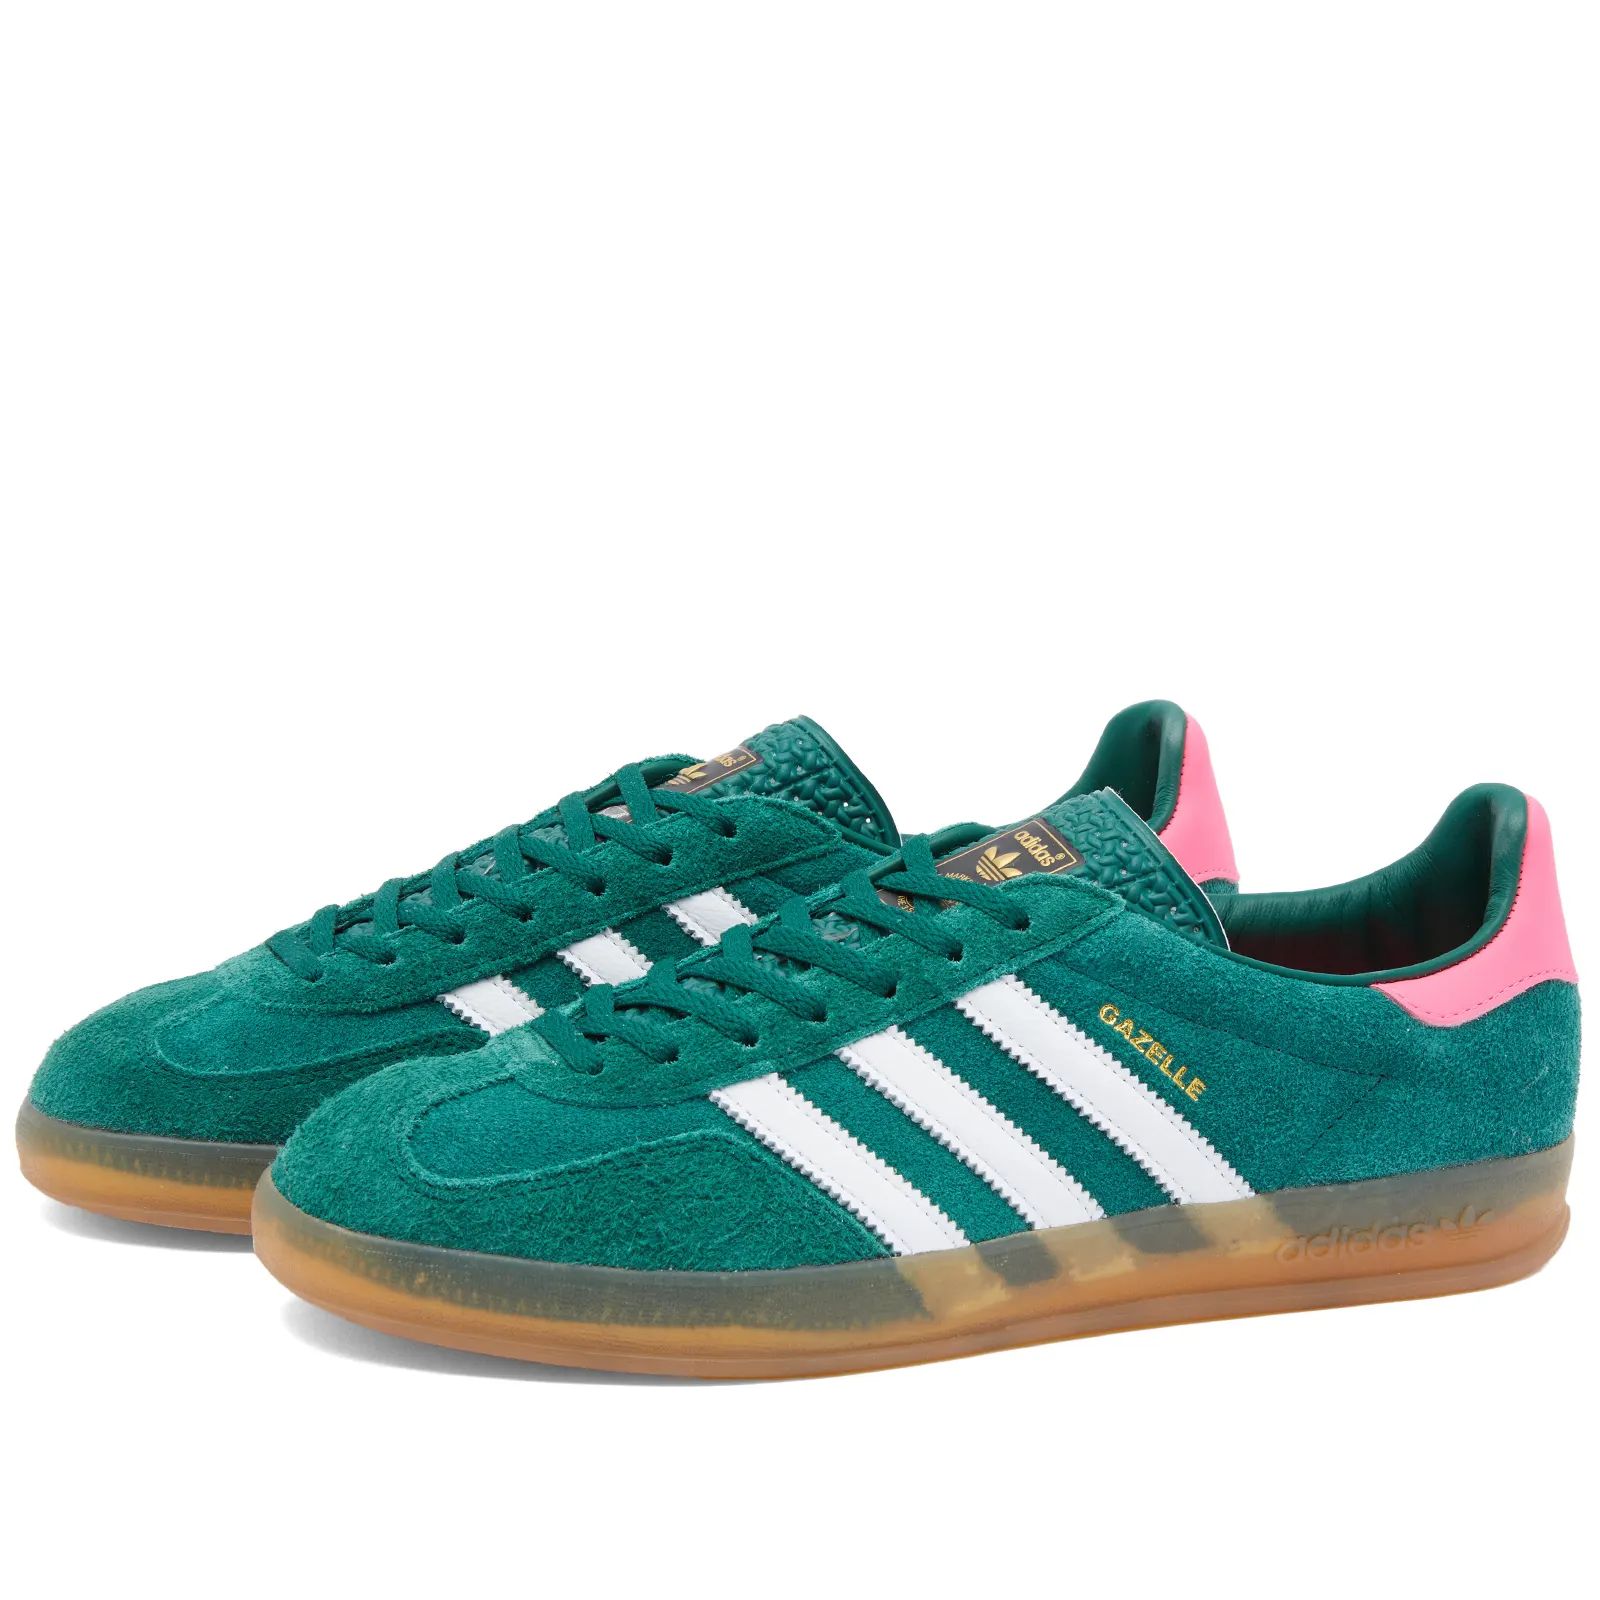 Adidas Gazelle Indoor Collegiate Green, Ftwr White & Lucid Pink | END. | End Clothing (US & RoW)